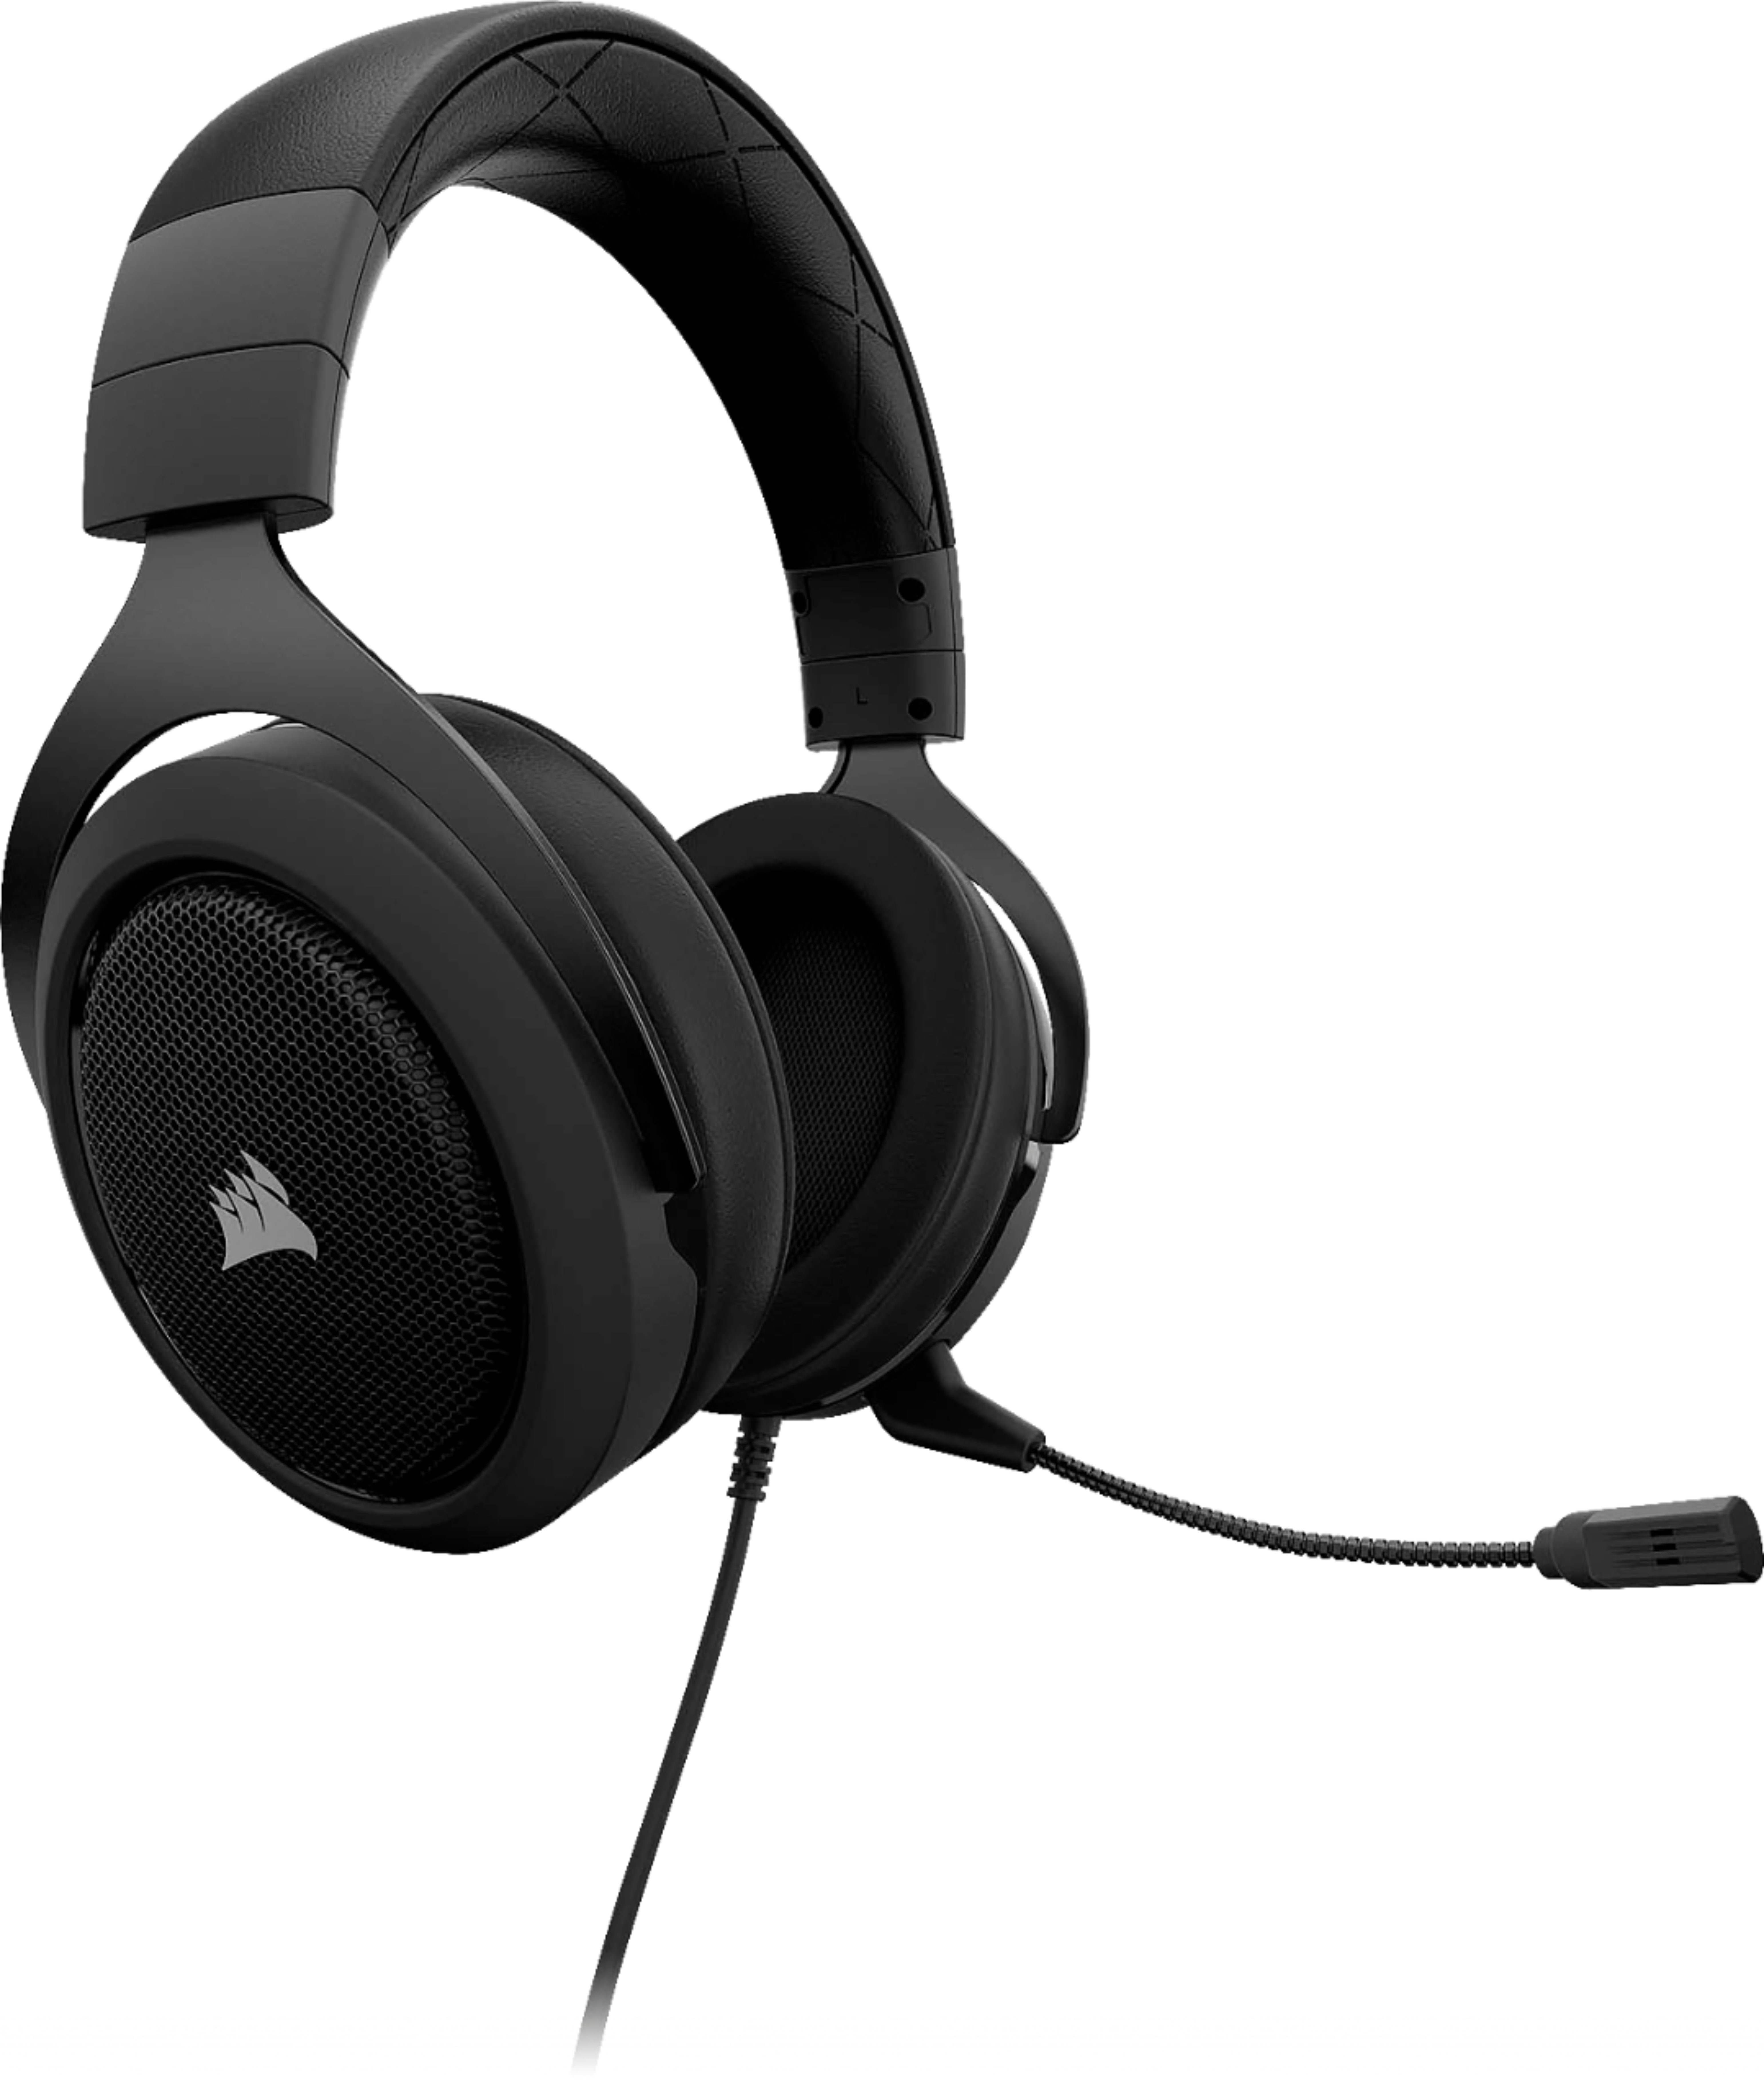 headset for pc and xbox one